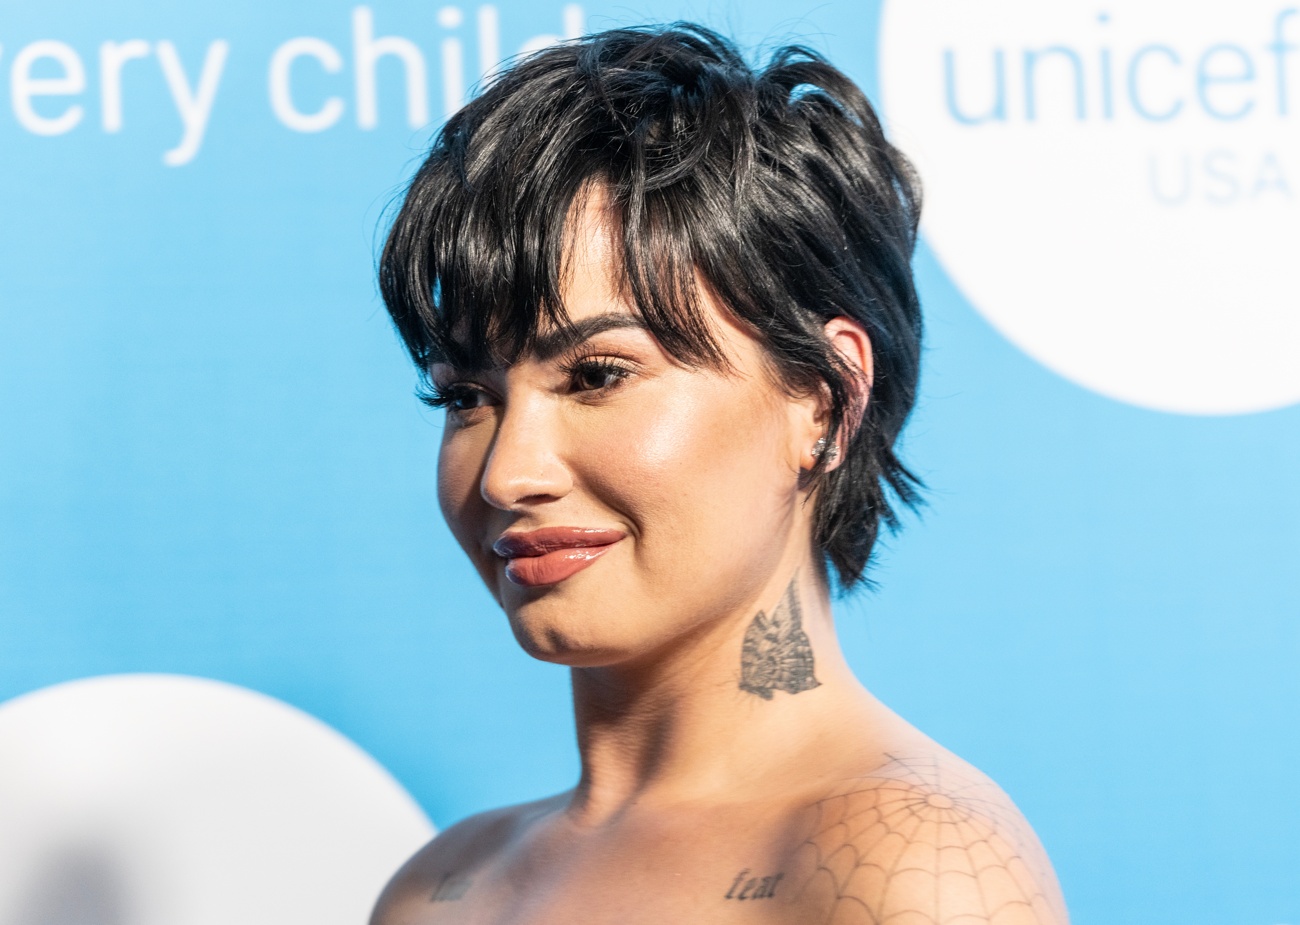 As Pride Month kicks off, Demi Lovato shares words of encouragement: ‘You are all extraordinary’